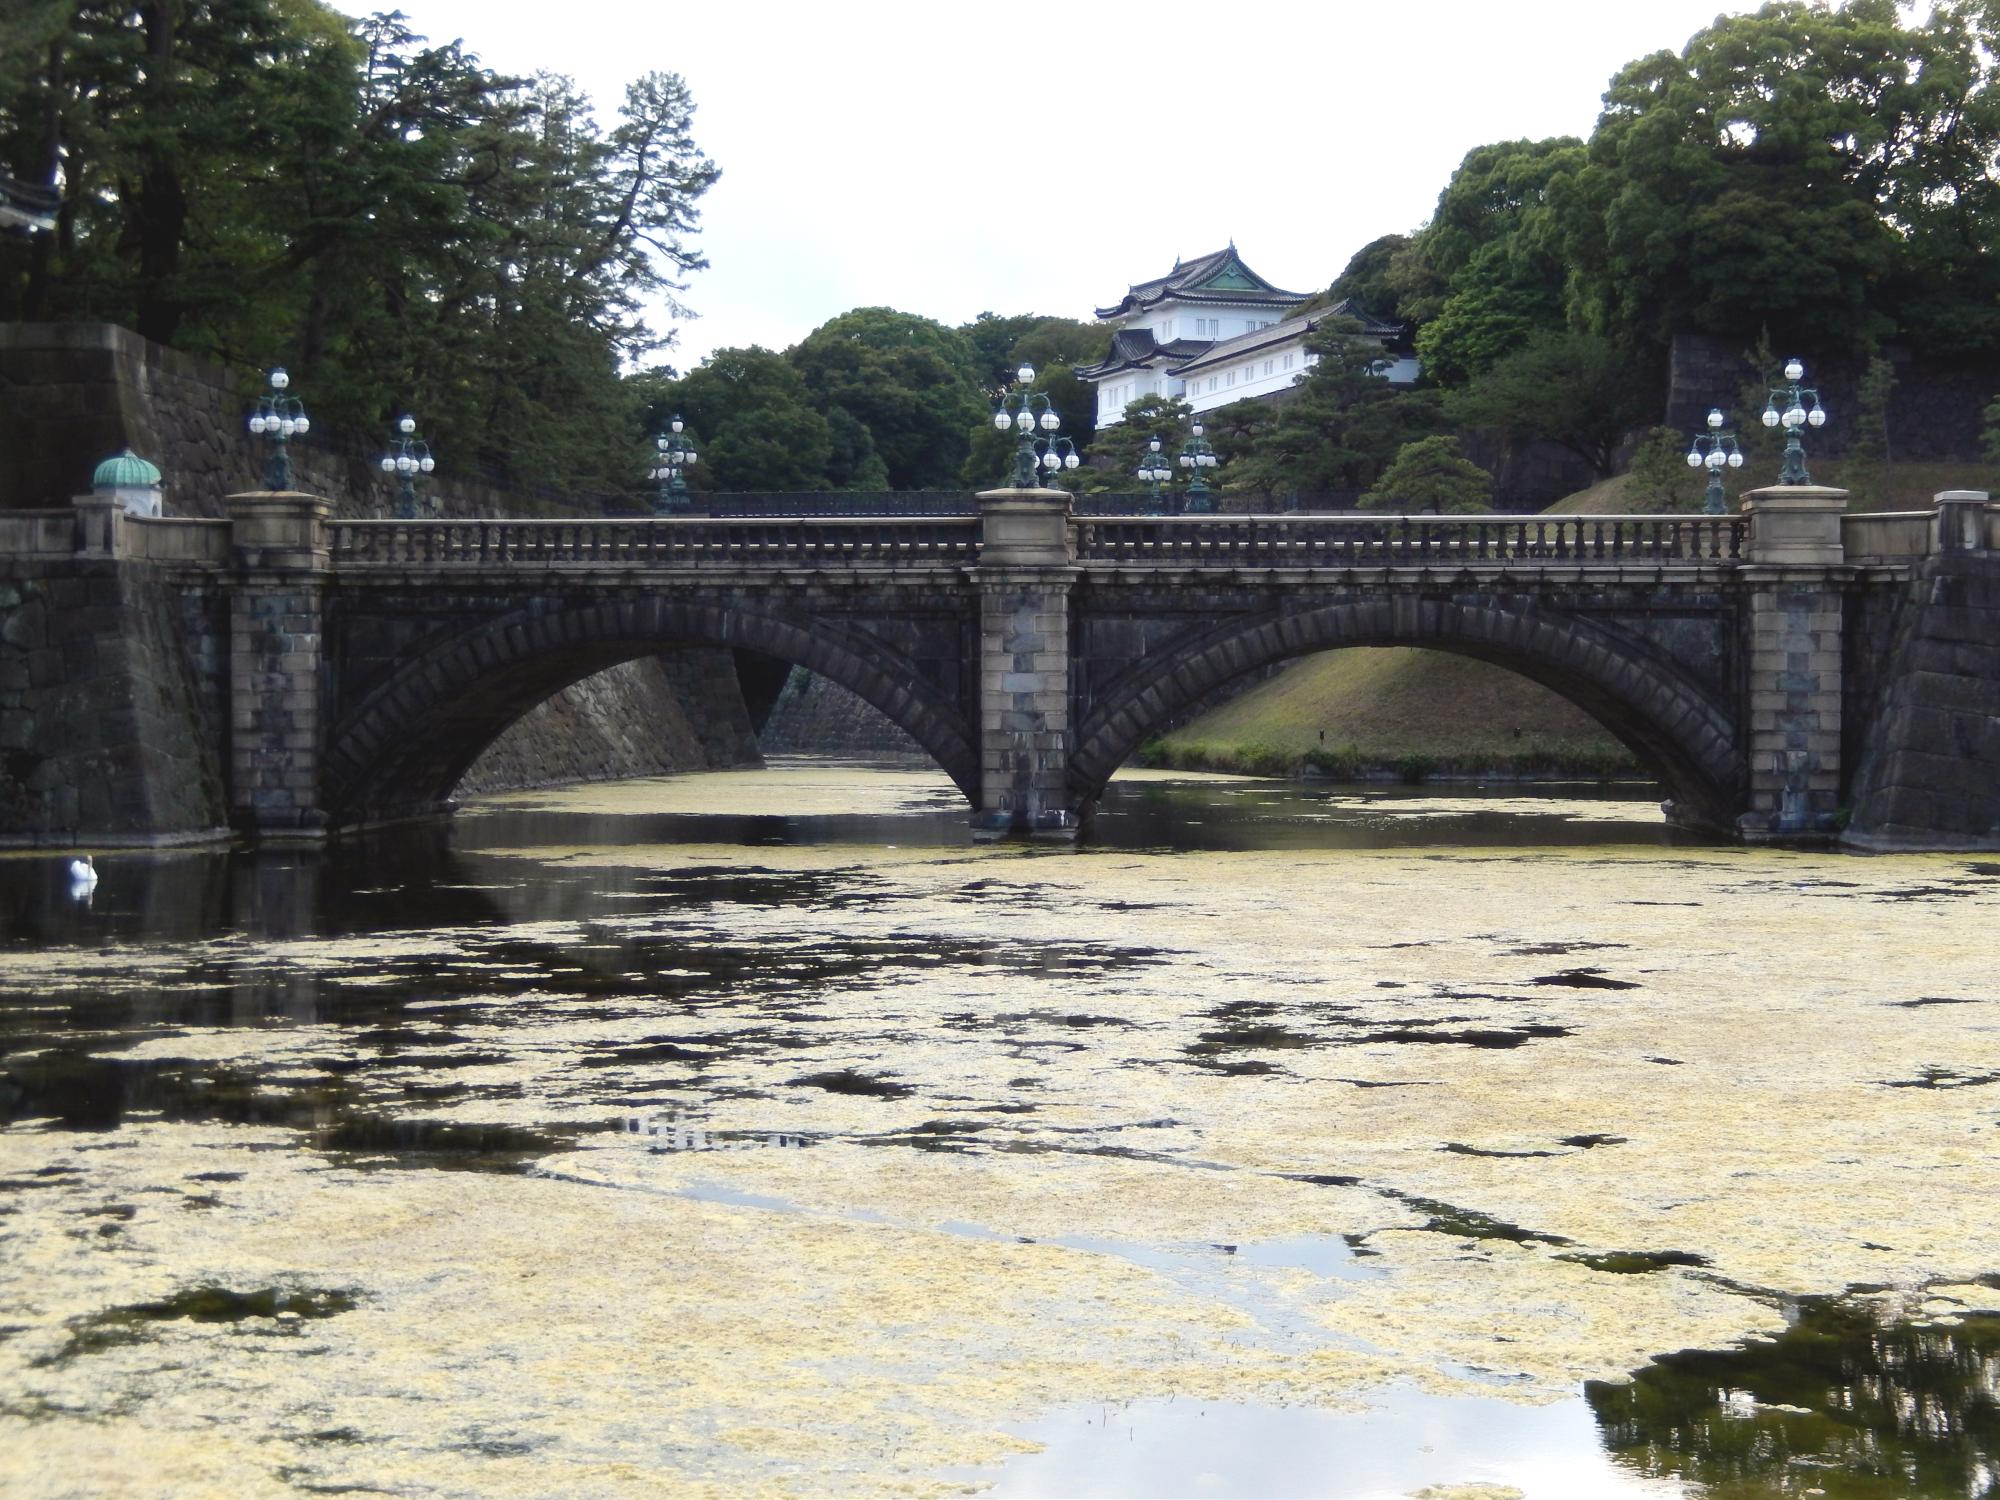 Tokyo (2017) - Imperial Palace #12